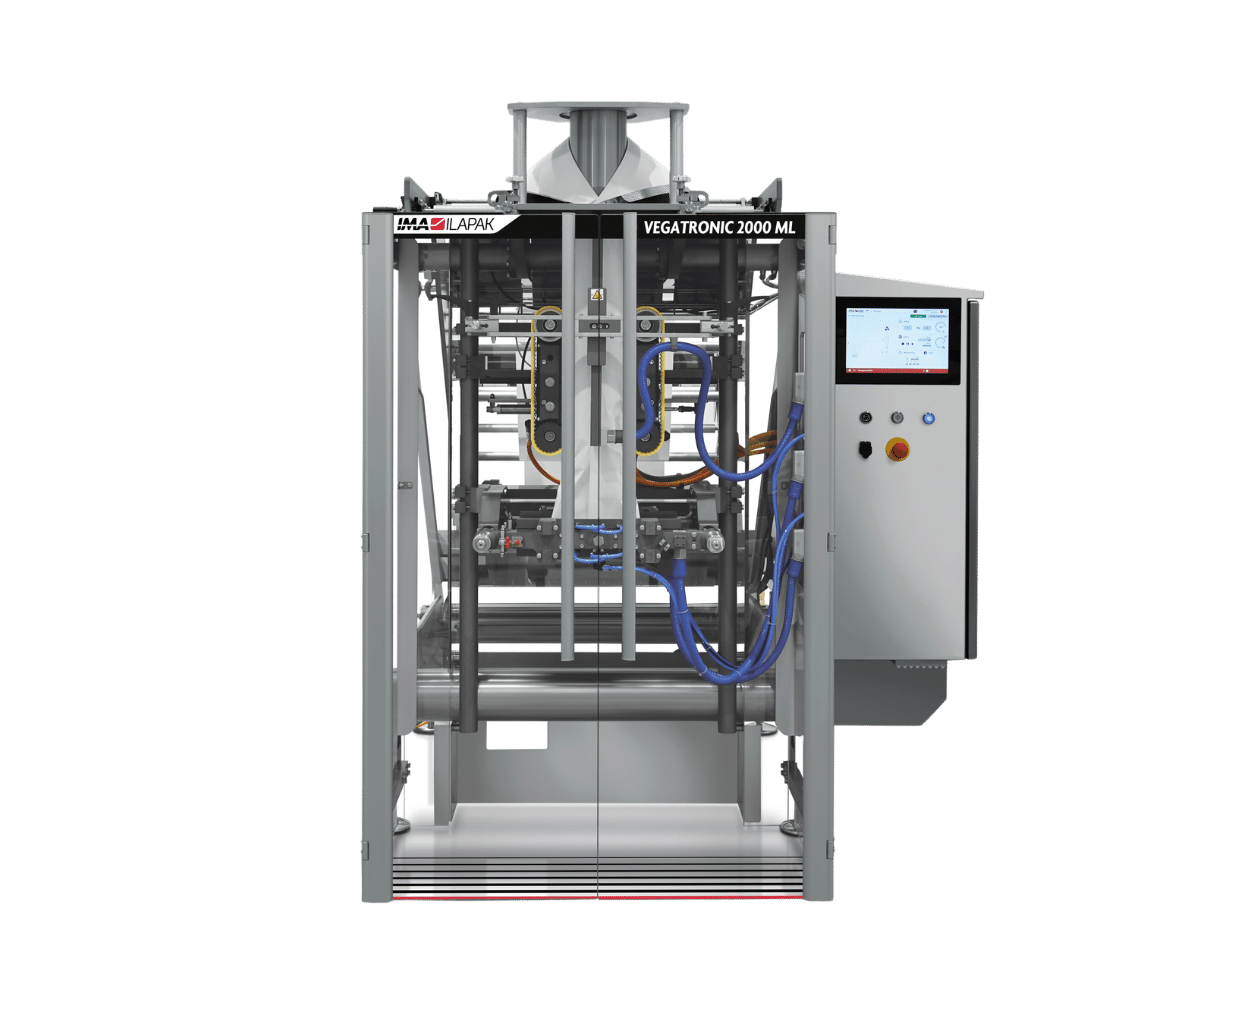 VEGATRONIC 2000 ML (VFFS – Vertical Form Fill and Seal) packaging machine.